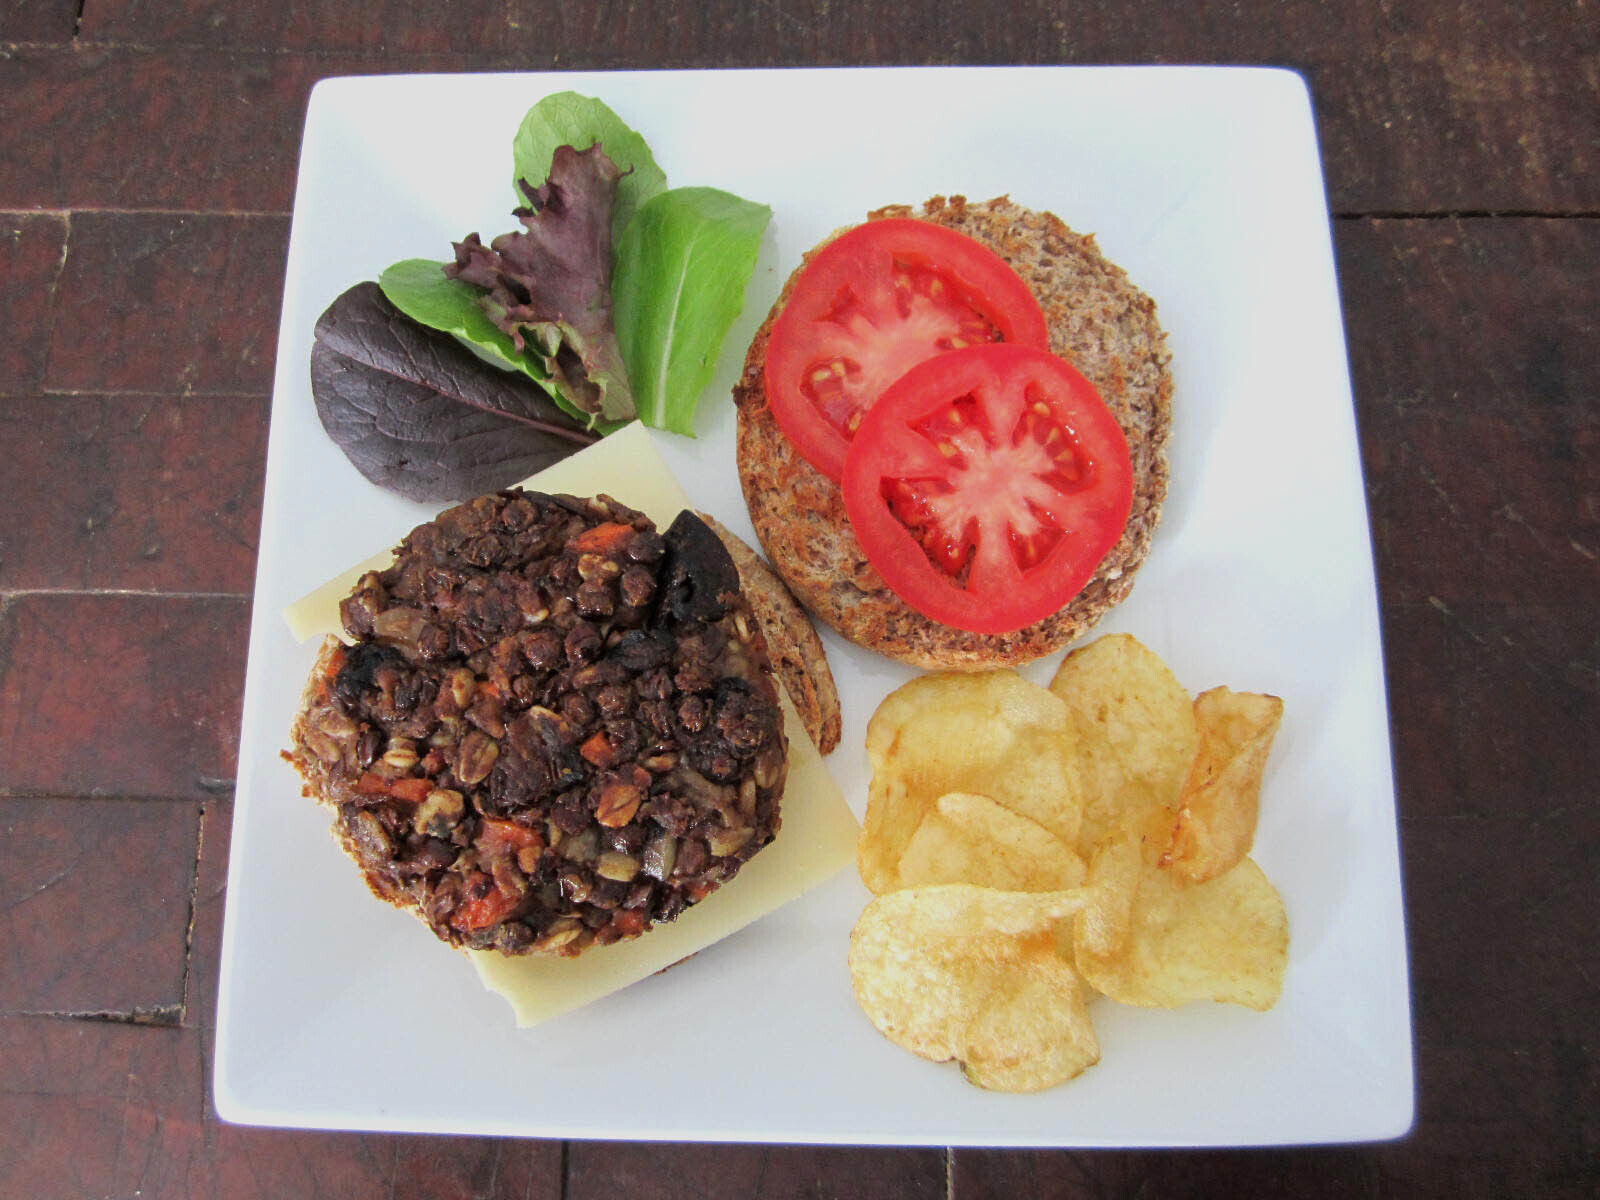 Lentil carrot burgers with cheese, tomatoes, lettuce and chips on the side